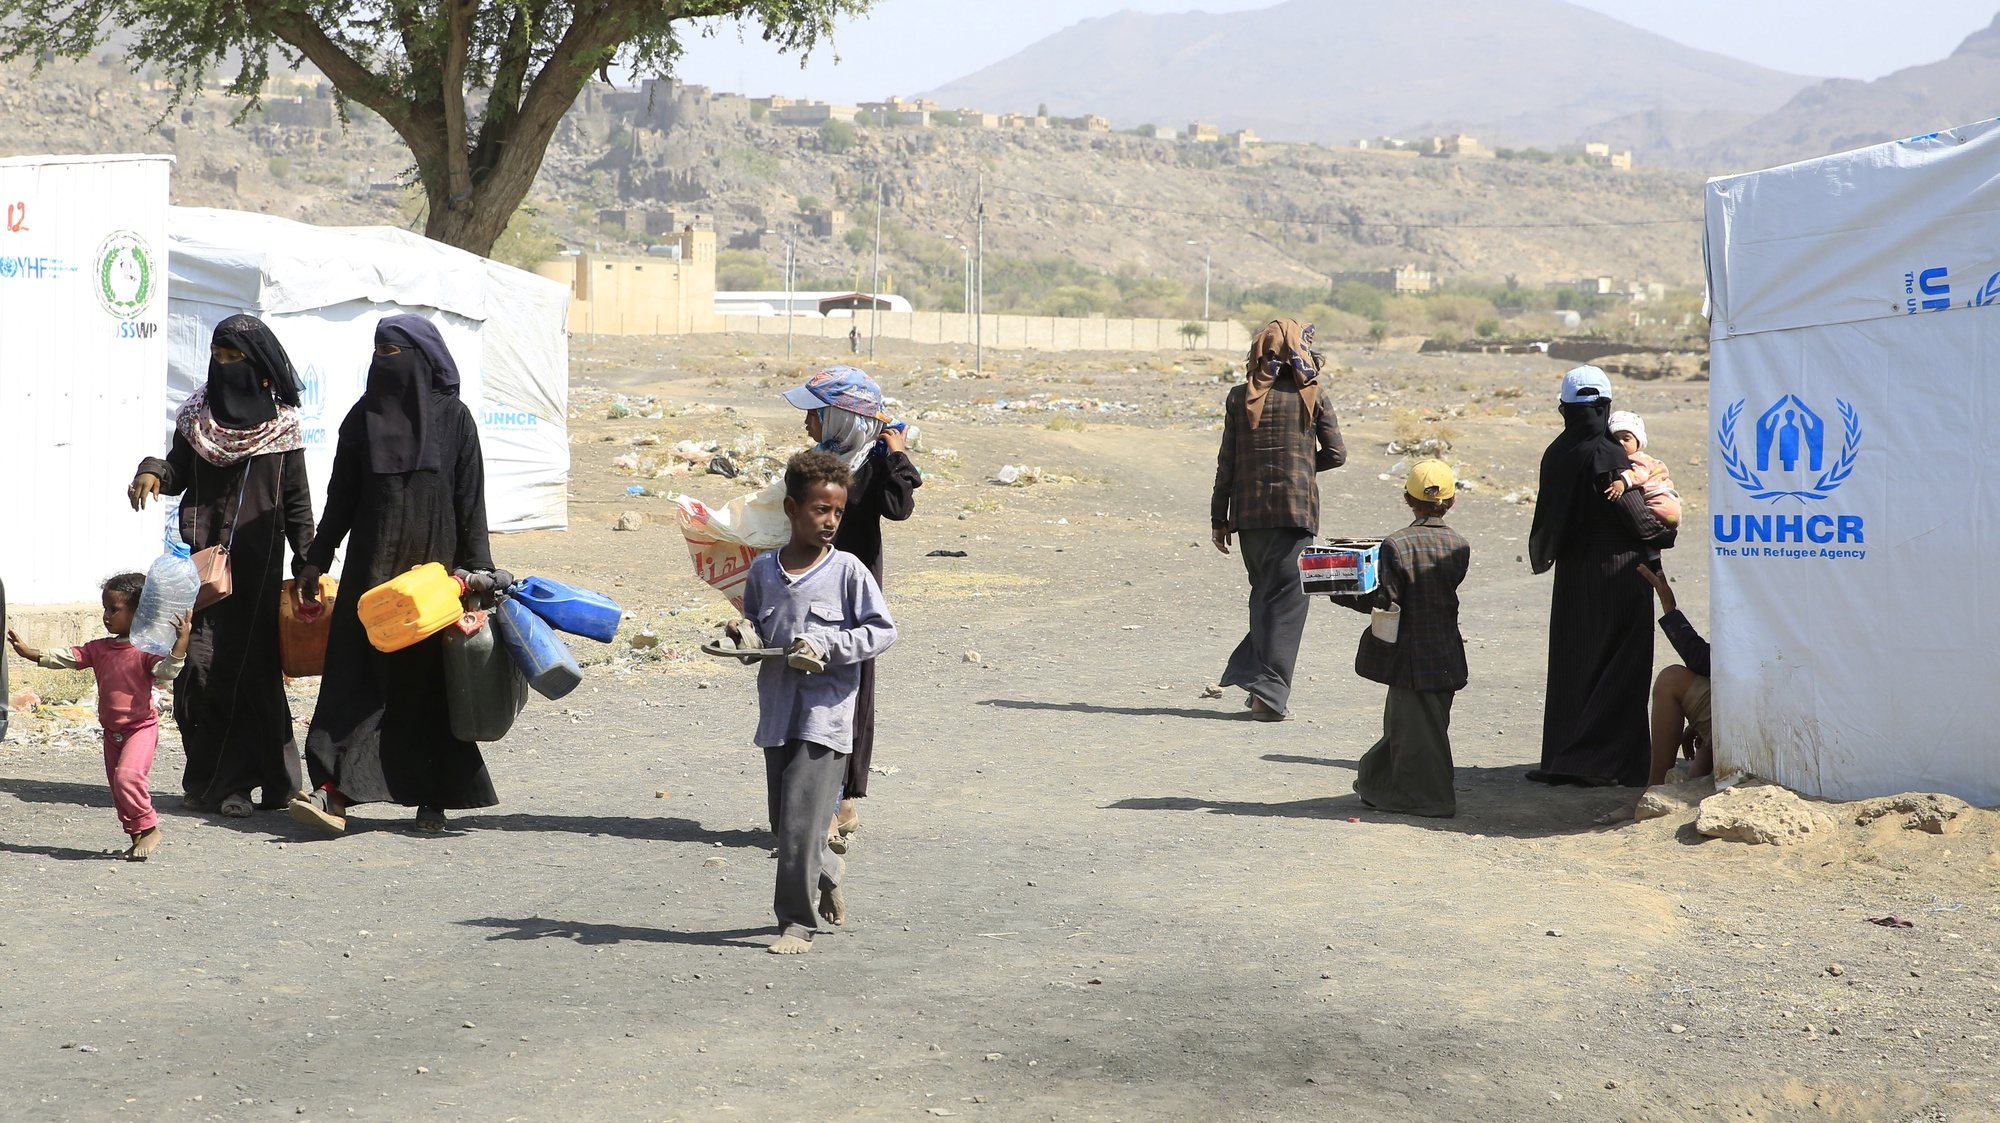 epa10099602 Displaced Yemenis walk through a camp for Internally Displaced Persons (IDPs) amid a UN-brokered nationwide truce, on the outskirts of Sana&#039;a, Yemen, 30 July 2022 (issued 31 July 2022). UN and US diplomatic efforts underway to have a UN-brokered truce in Yemen extended again on 02 August. The two-month truce entered into force on 02 April 2022 after the Yemeni government and the Saudi-led coalition reached an agreement with their rival, the Houthis. It extended for another two months on 02 June. The truce is the longest pause in fighting Yemen is experiencing since 2015 when the Saudi-UAE-led military coalition launched a military campaign against the Houthis for restoring the Saudi-backed government, causing the internal displacement of 4.3 million Yemenis by March 2022, according to UNICEF estimates.  EPA/YAHYA ARHAB